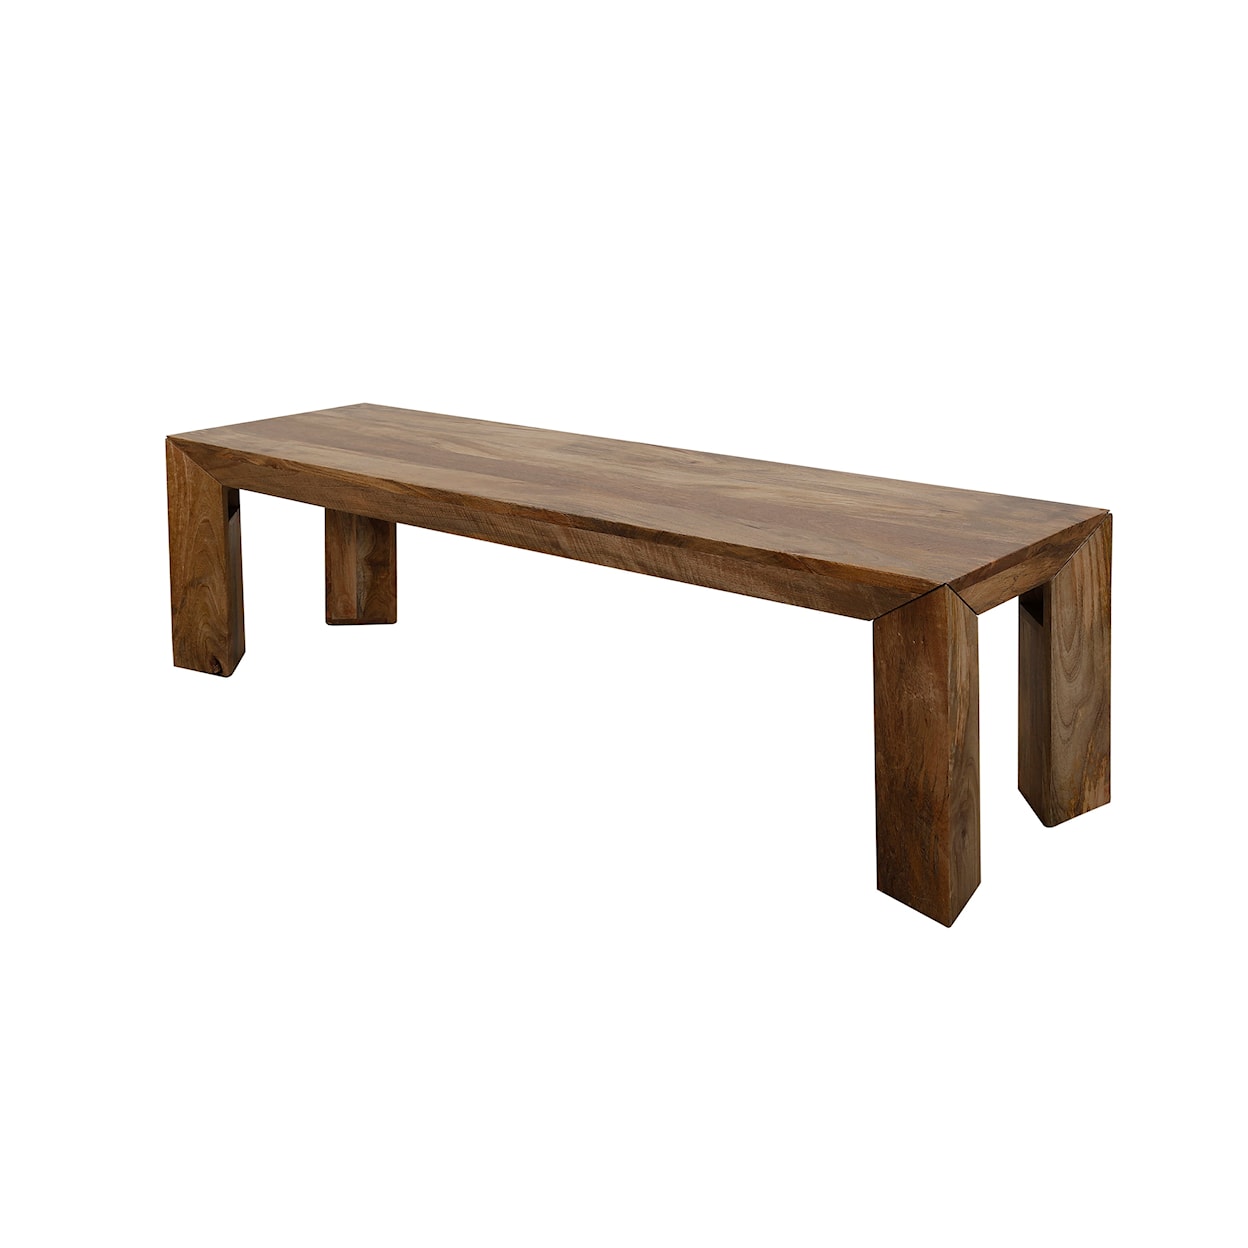 Parker House Crossings Downtown Dining Bench